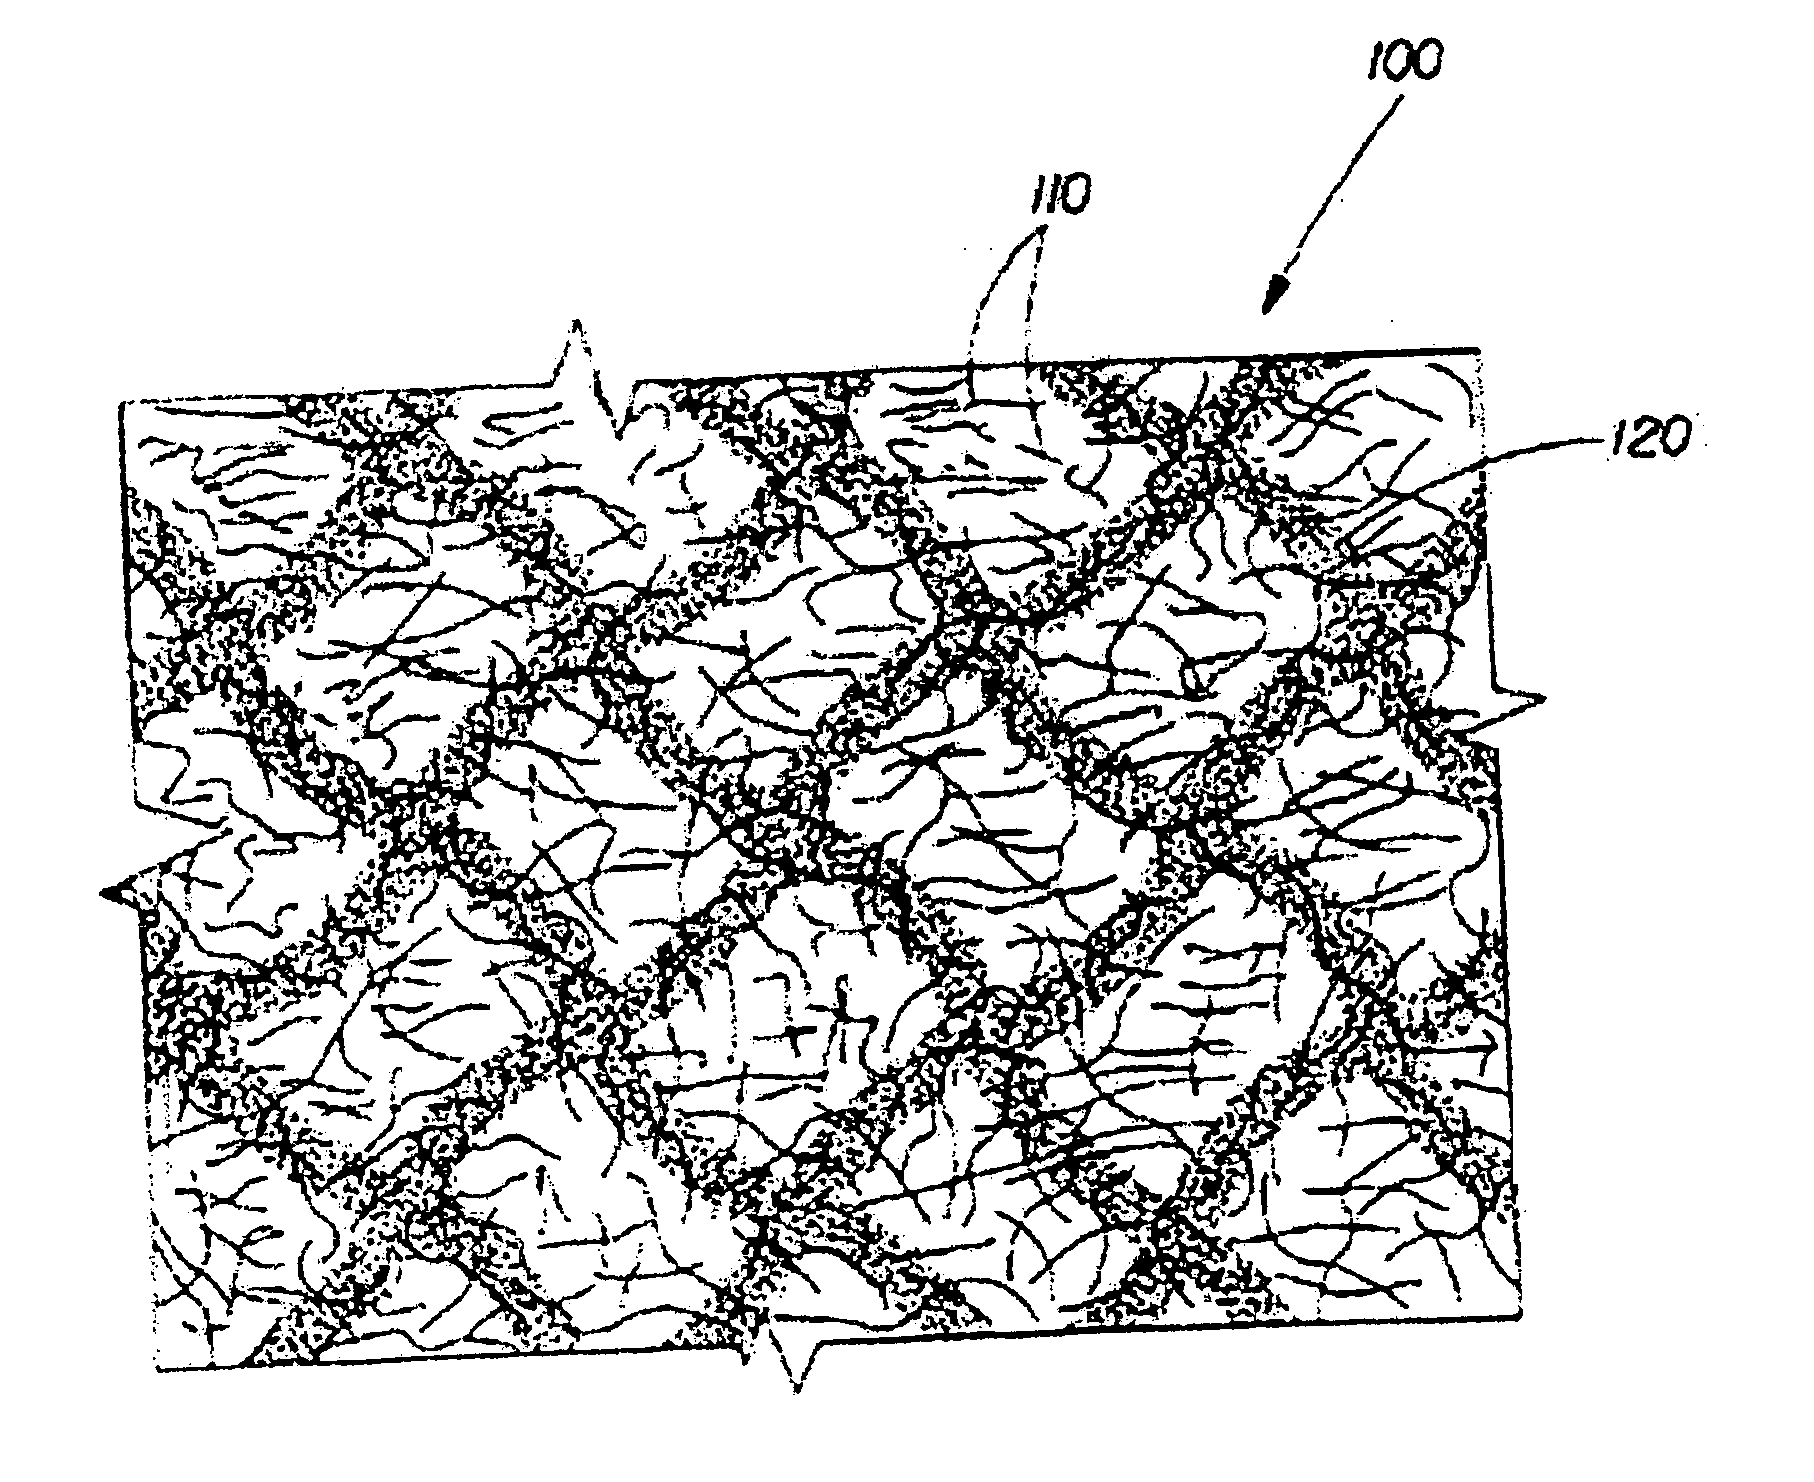 Nonwoven fibrous structure comprising synthetic fibers and hydrophilizing agent